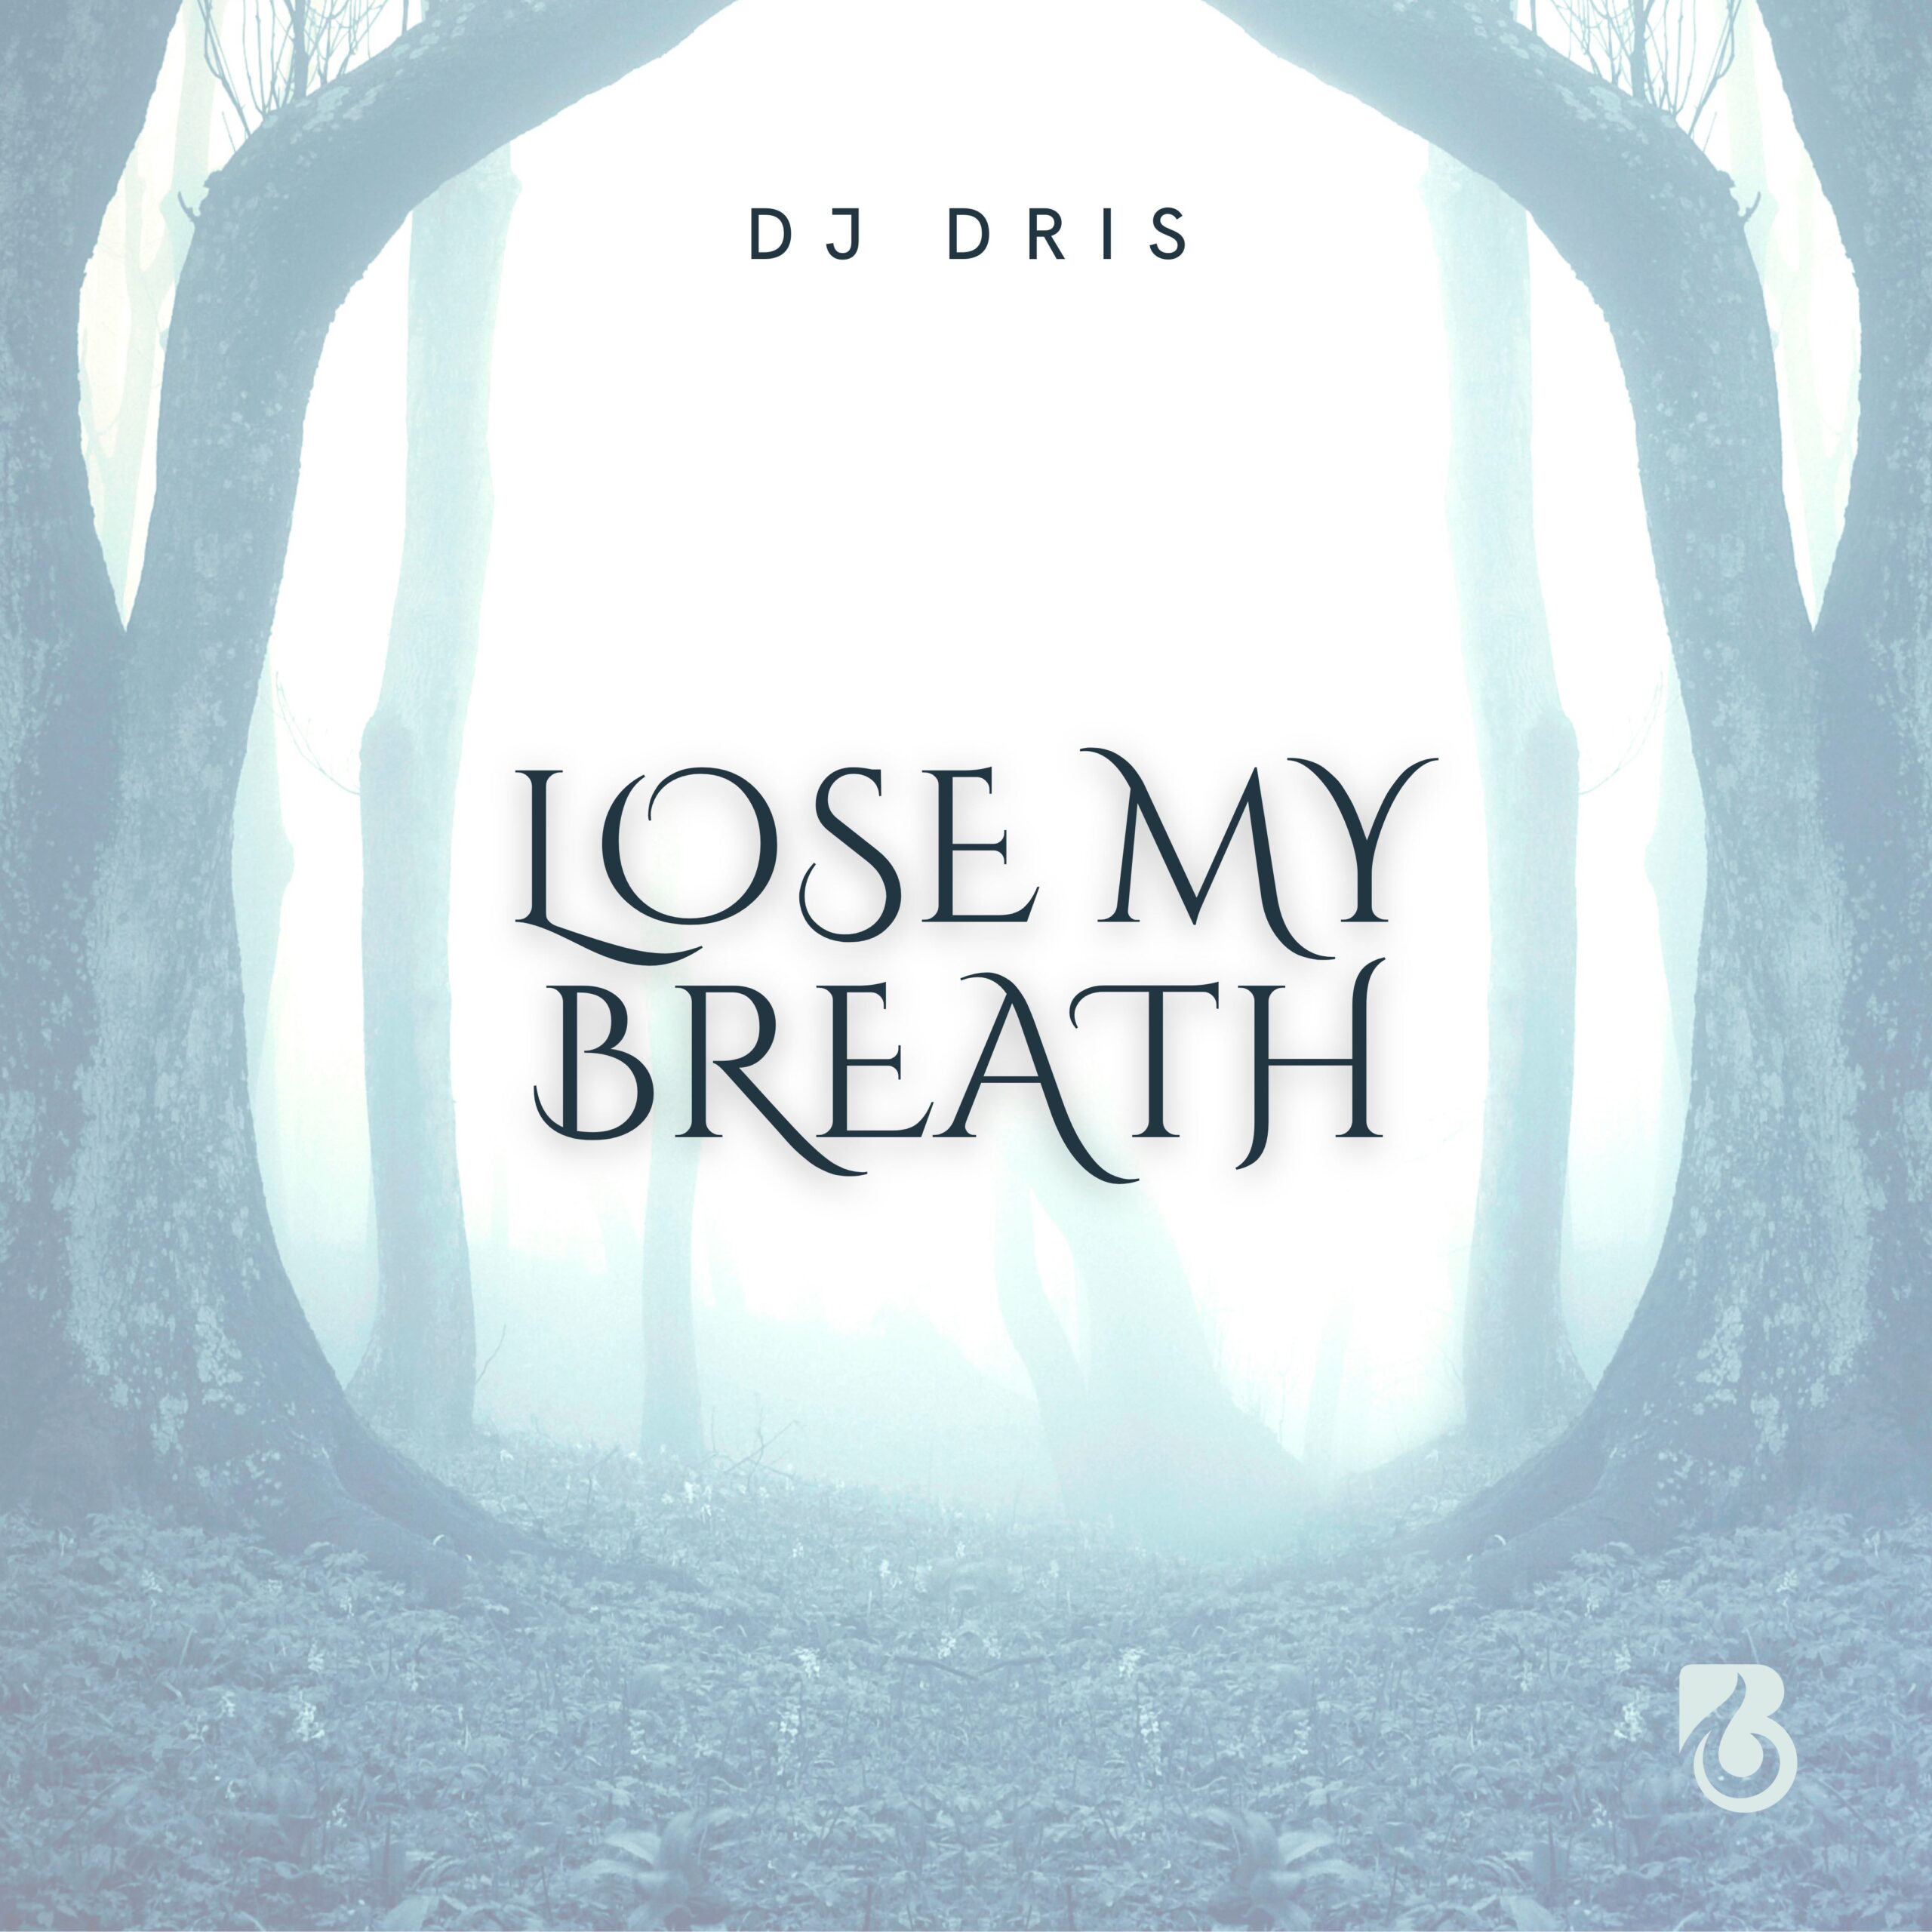 Introducing 'Lose My Breath': the Newest Production From the Talented DJ Dris